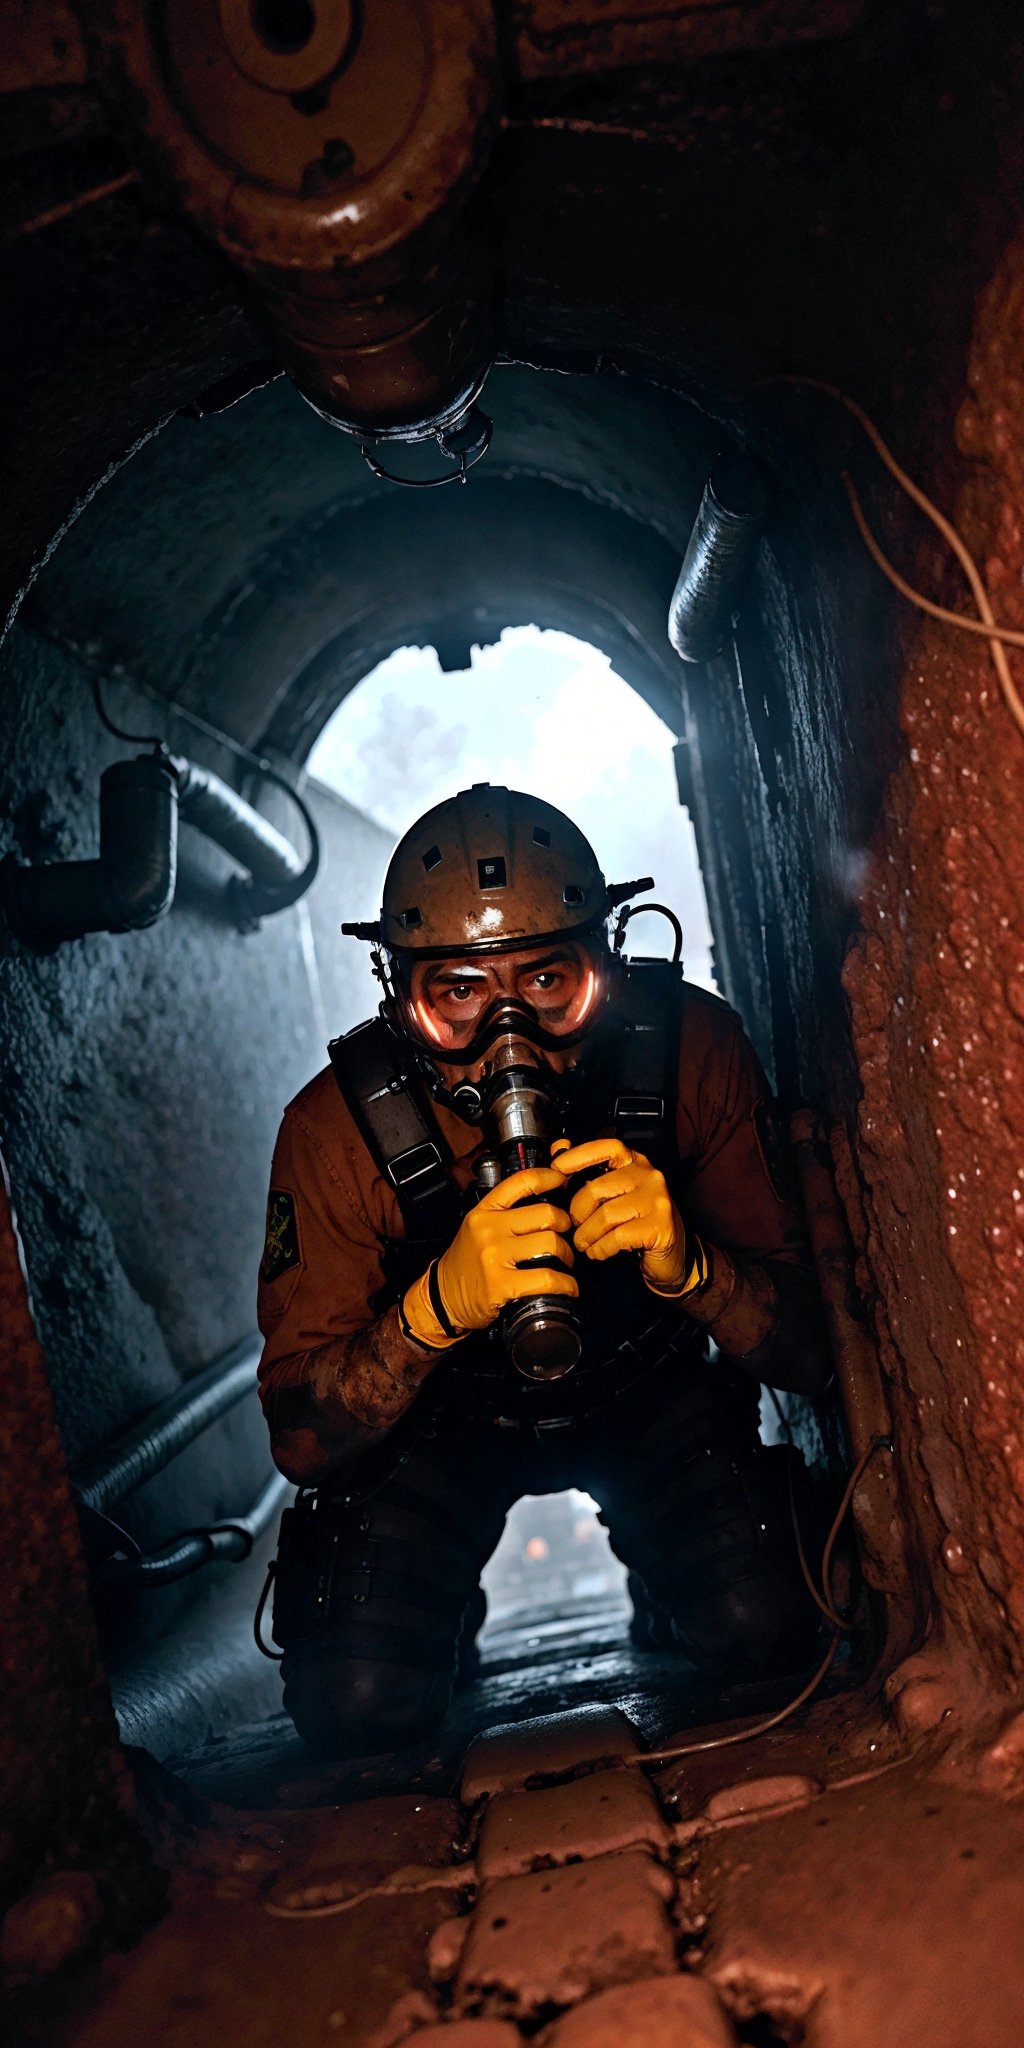 A County worker at Los Angeles Sewer line, using a Self Contained breathing apparatus, harnessed, hard hard, googles, gloves,  radio to communicate, flashlights, descending trough a steer manhole into a giant vault, humid, water vapor, mold, dim lights, rats, cockroaches, 